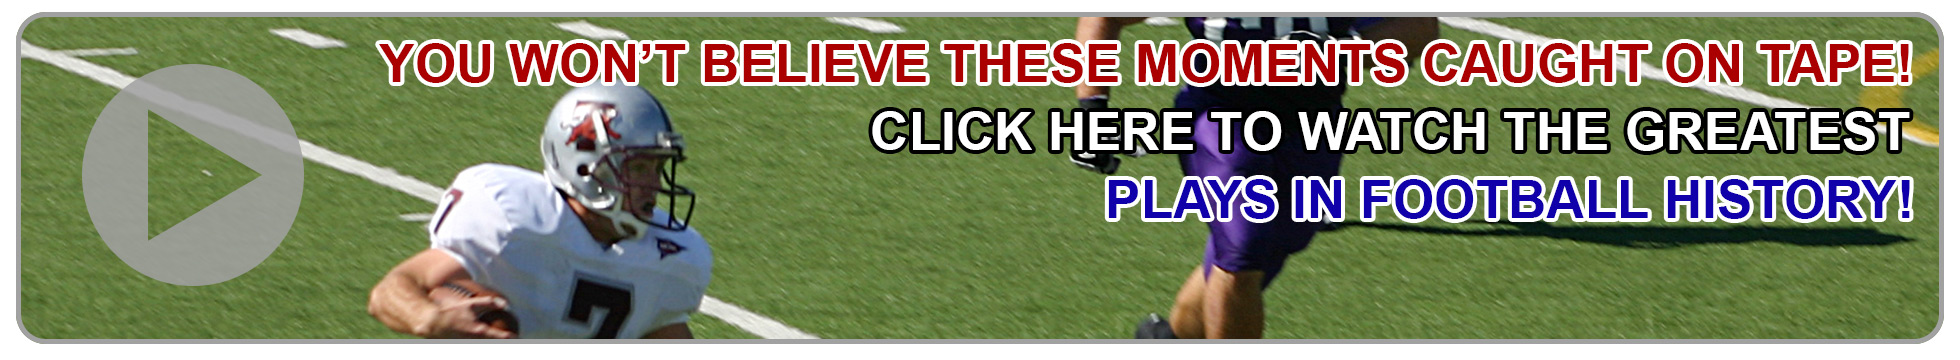 Fake ad for You won't believe these moments caught on tape, click here to watch the greatest plays in football history